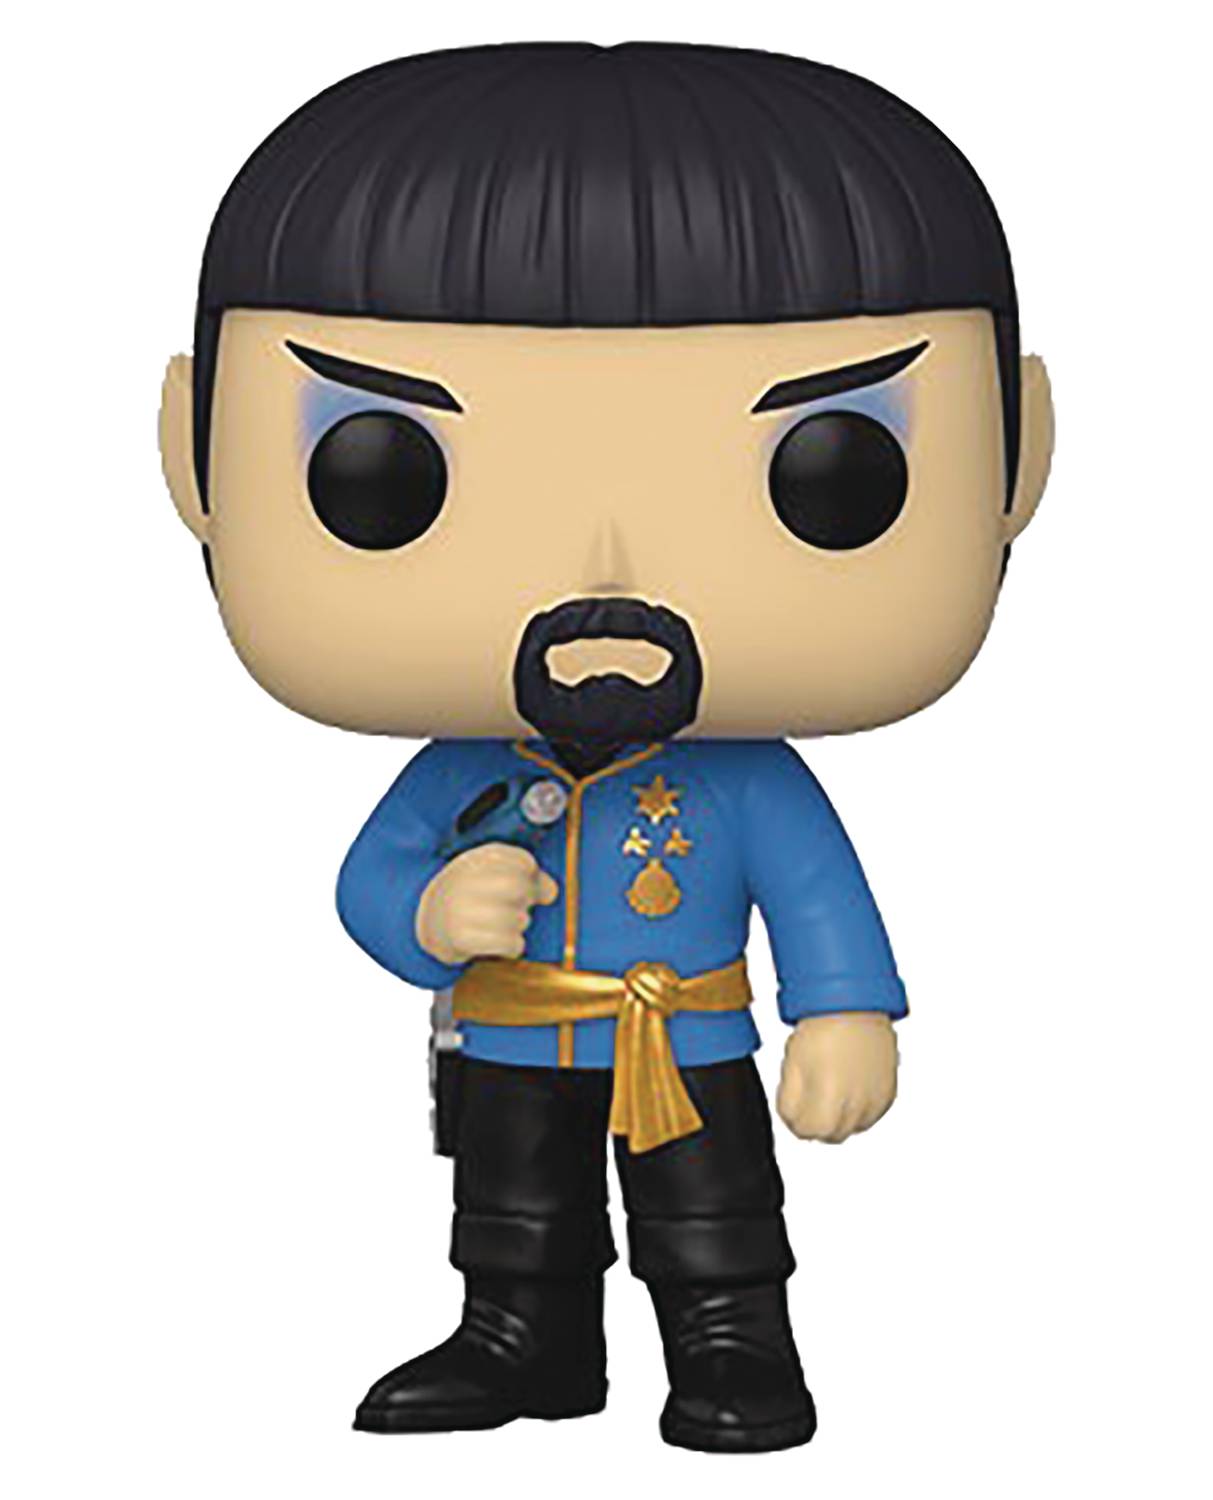 POP TV STAR TREK SPOCK MIRROR MIRROR OUTFIT | L.A. Mood Comics and Games